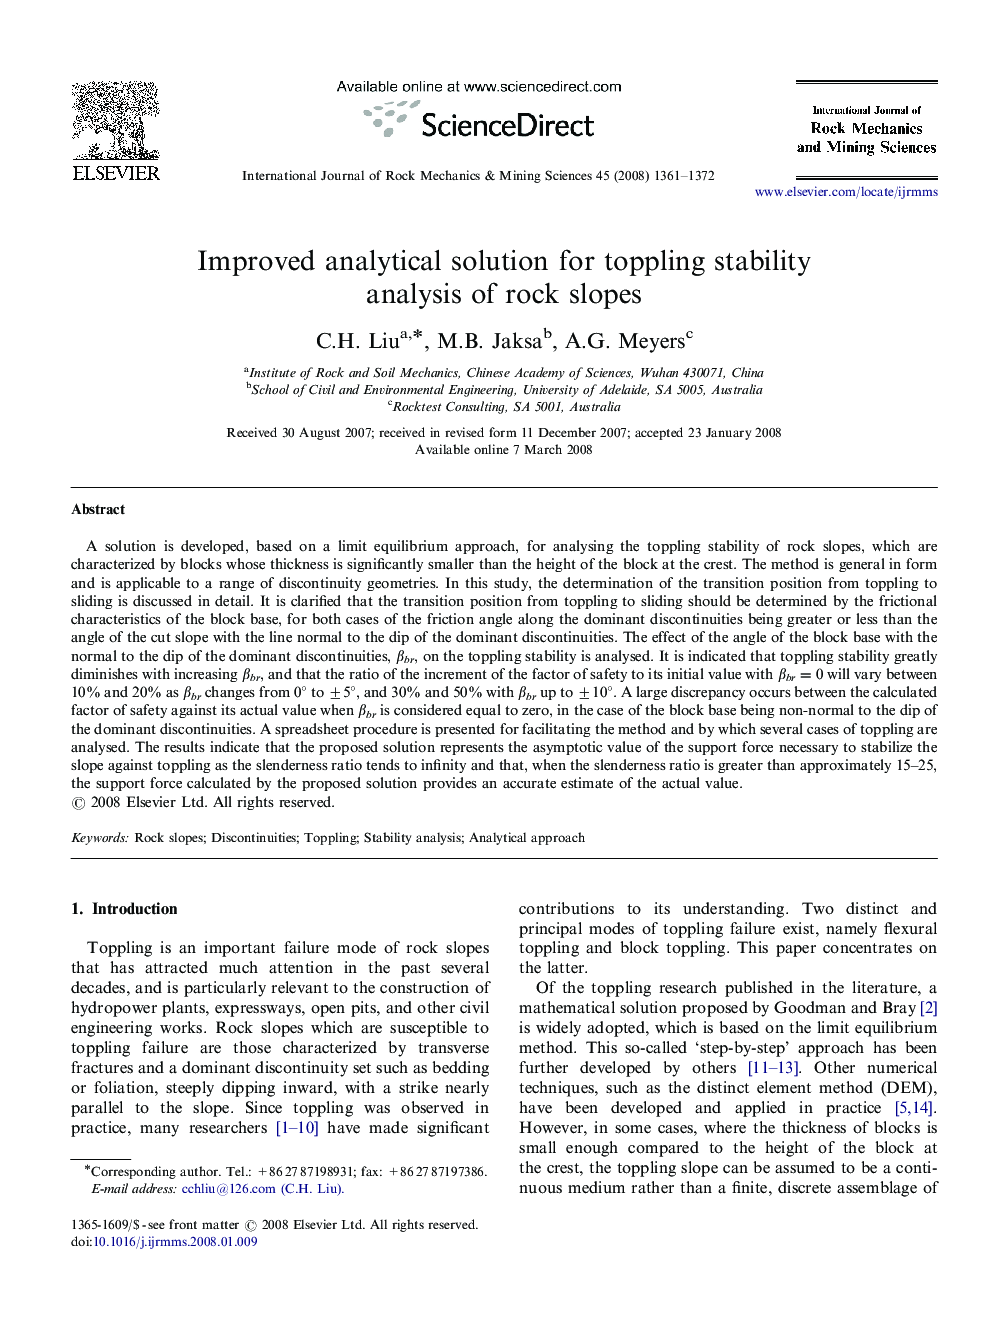 Improved analytical solution for toppling stability analysis of rock slopes